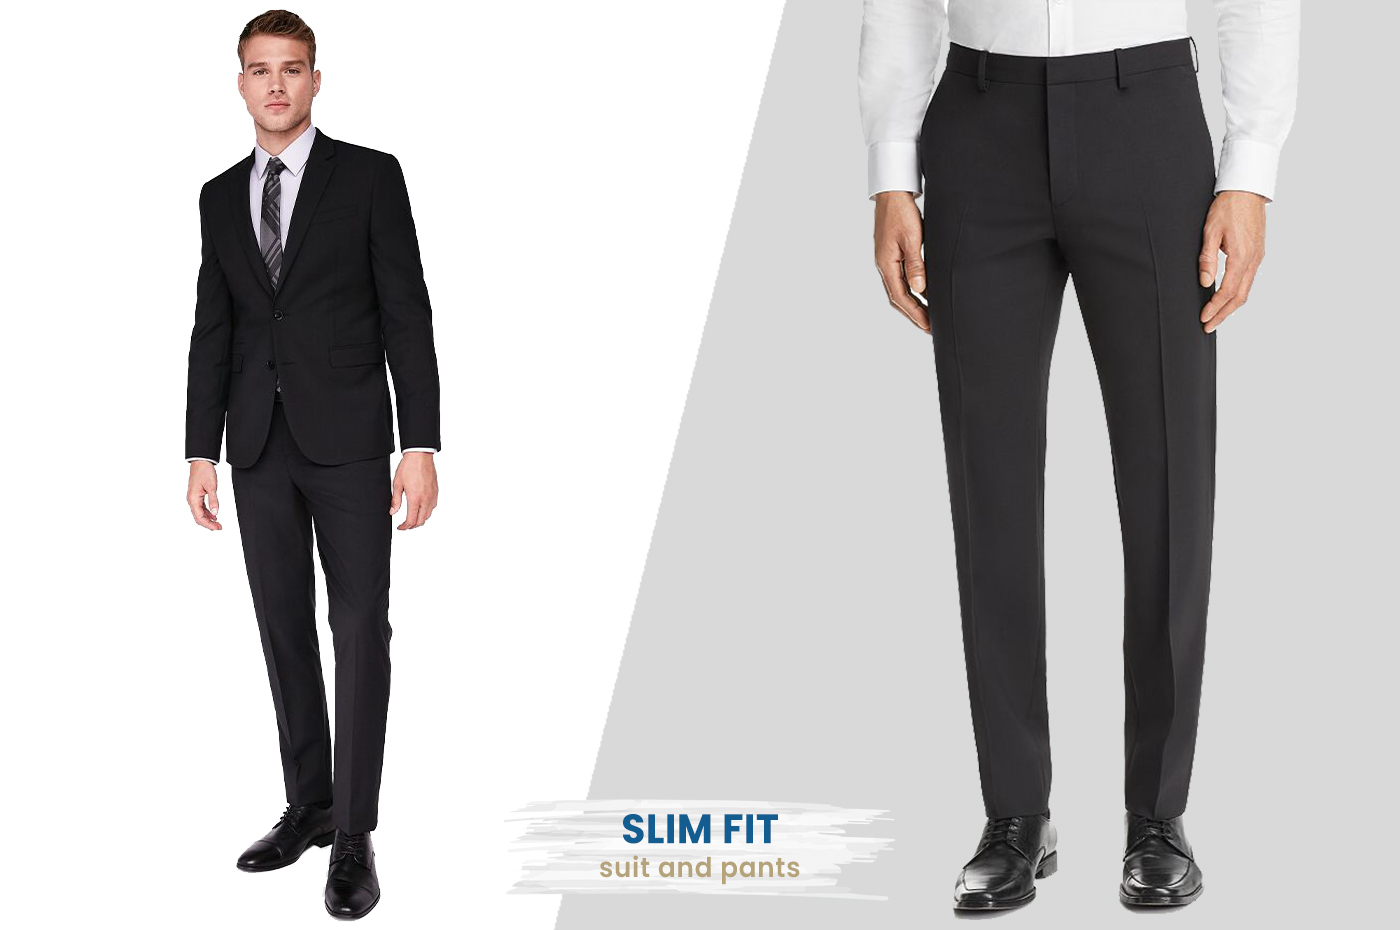 Men Slim-Fit Suits Guide & How to Wear - Suits Expert